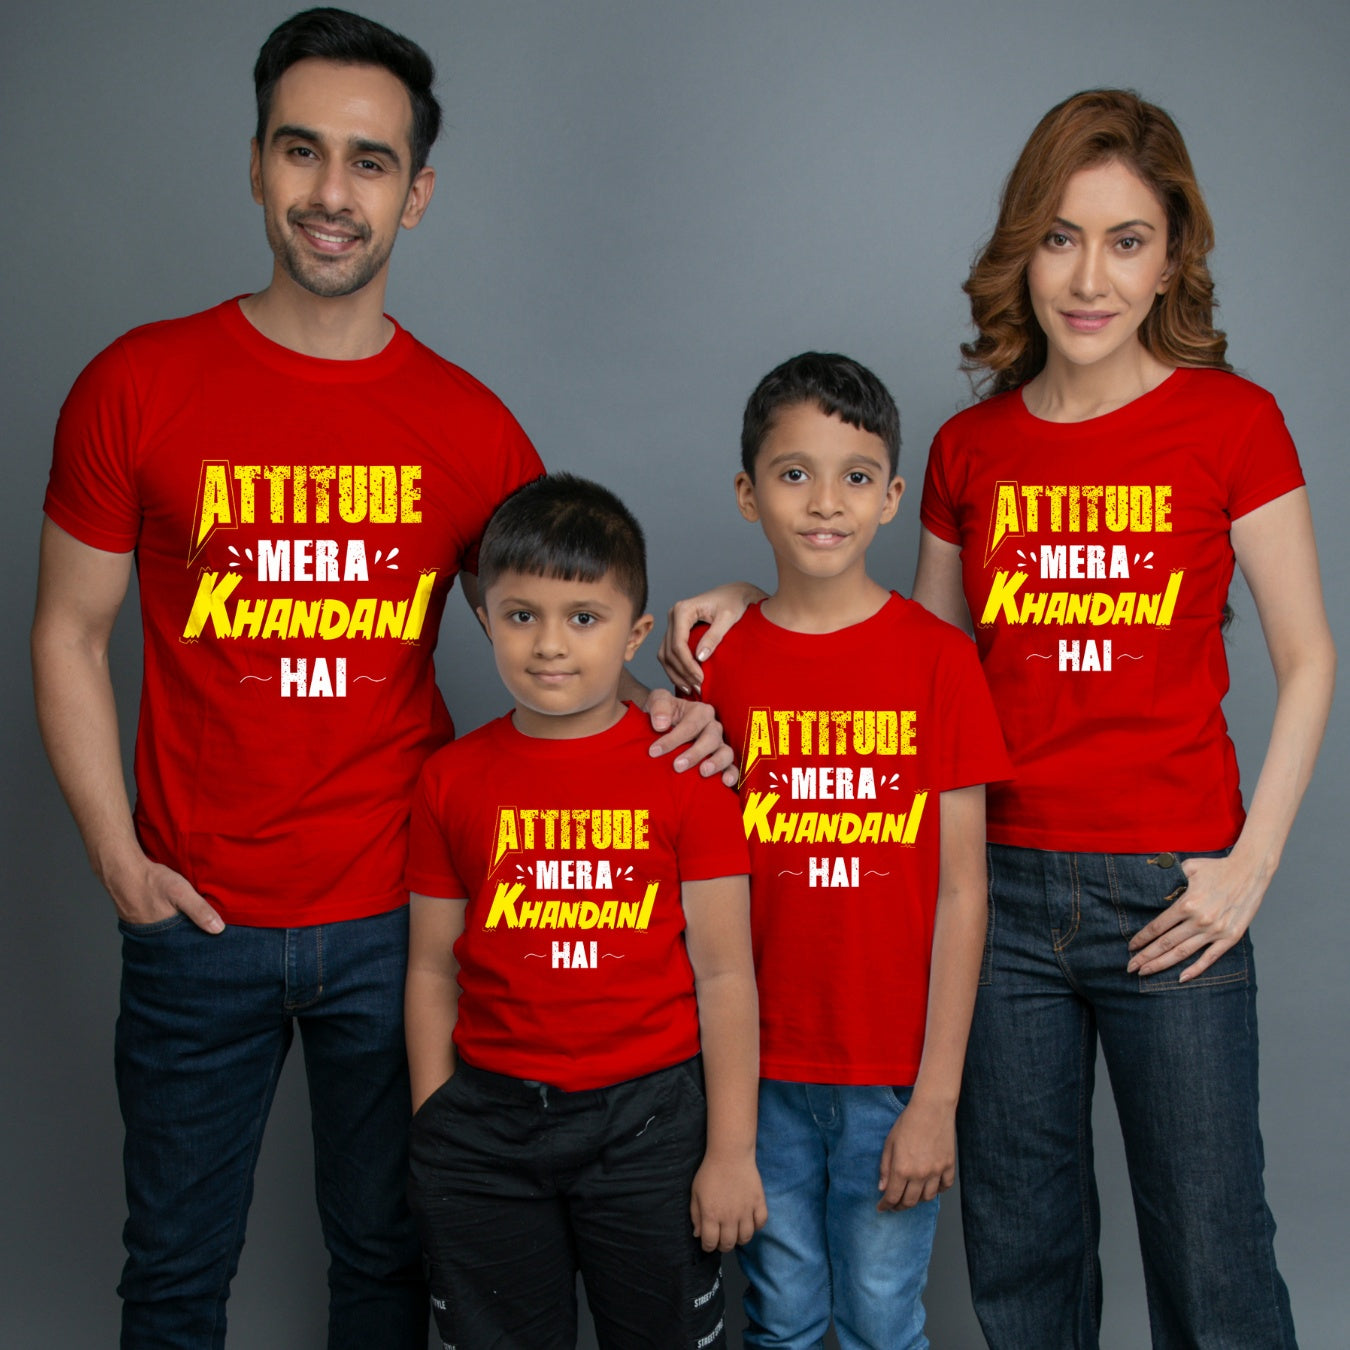 Family t shirts set of 4 Mom Dad Two Sons in Red Colour - Attitude Mera Khandani Hain Variant